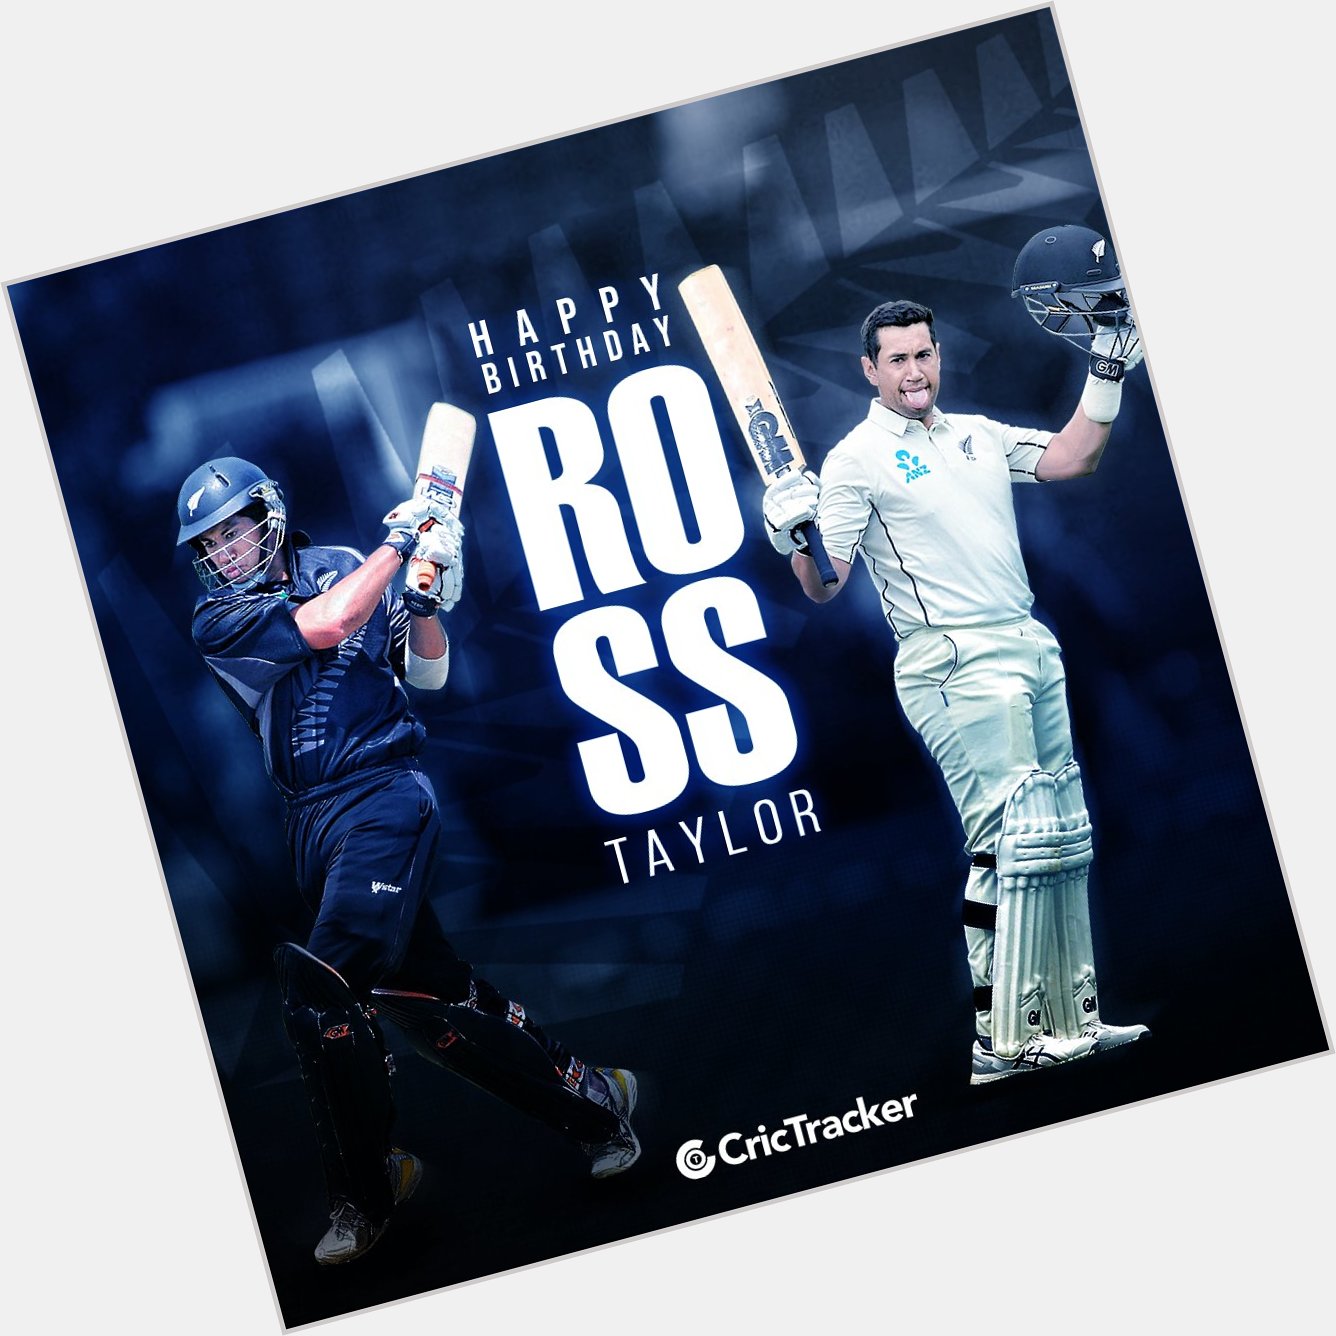 One of the legends of New Zealand cricket, wishing Ross Taylor a very happy birthday.  